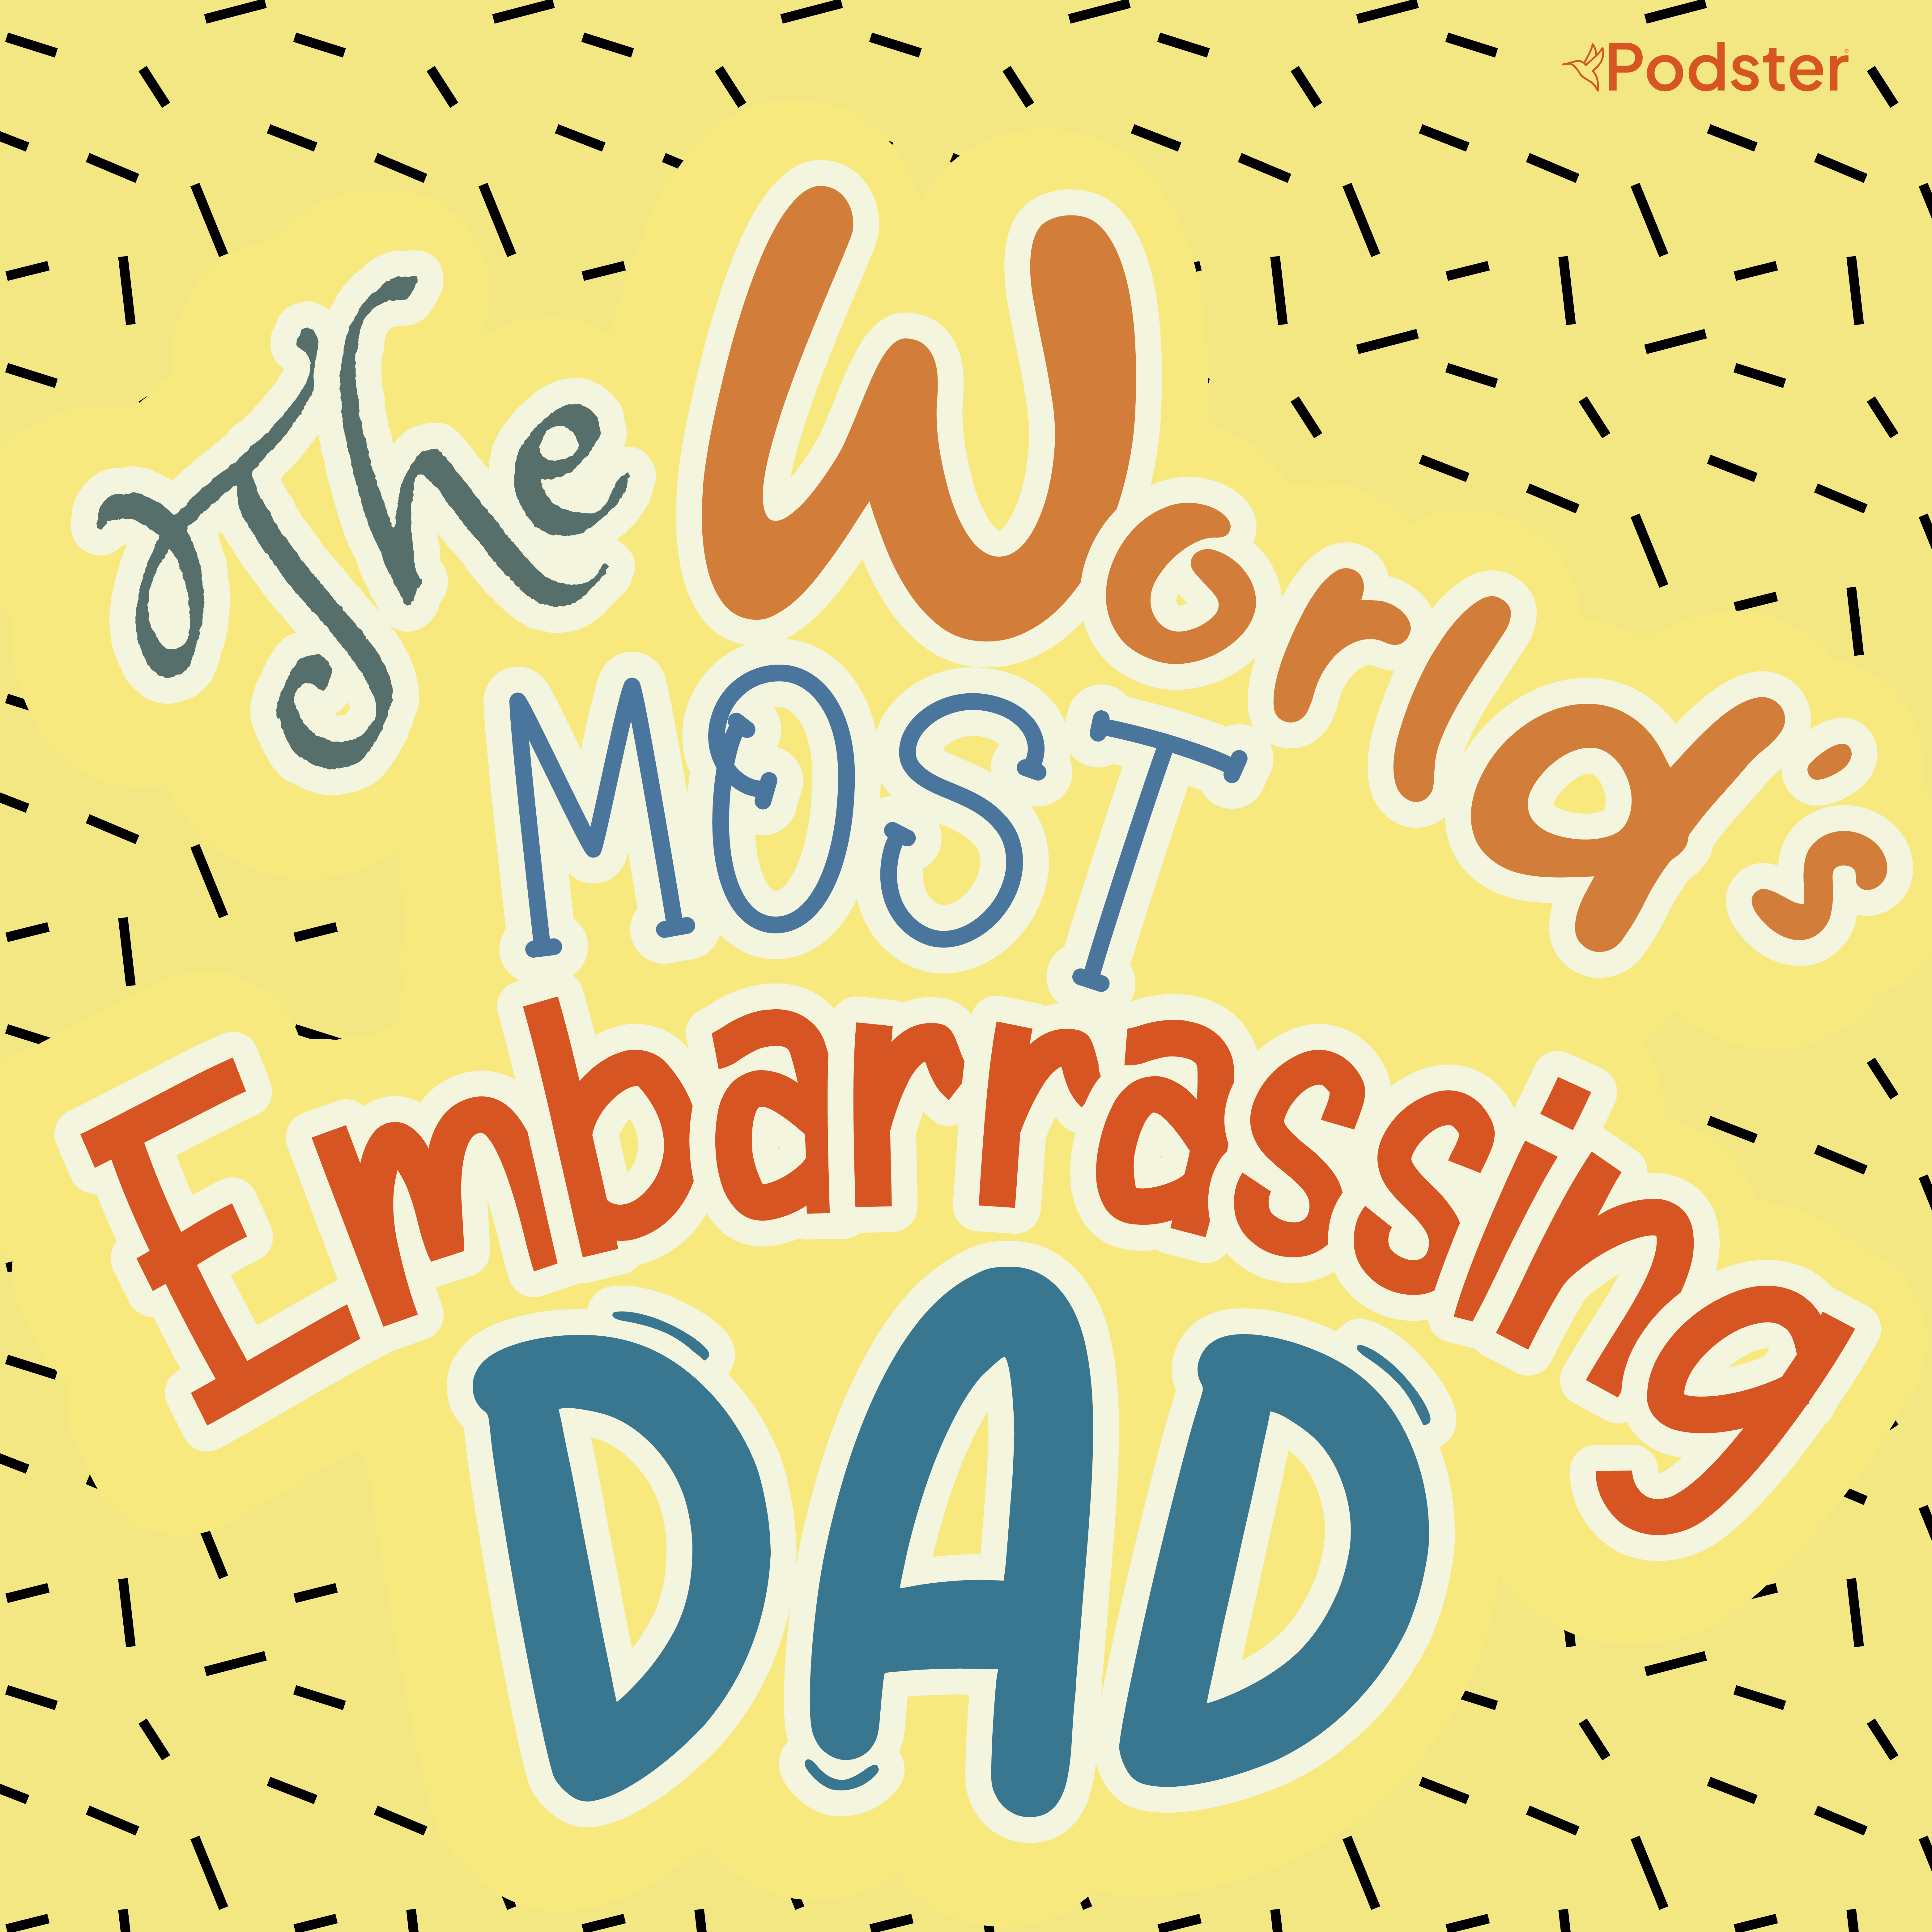 The World's Most Embarrassing Dad Podster show